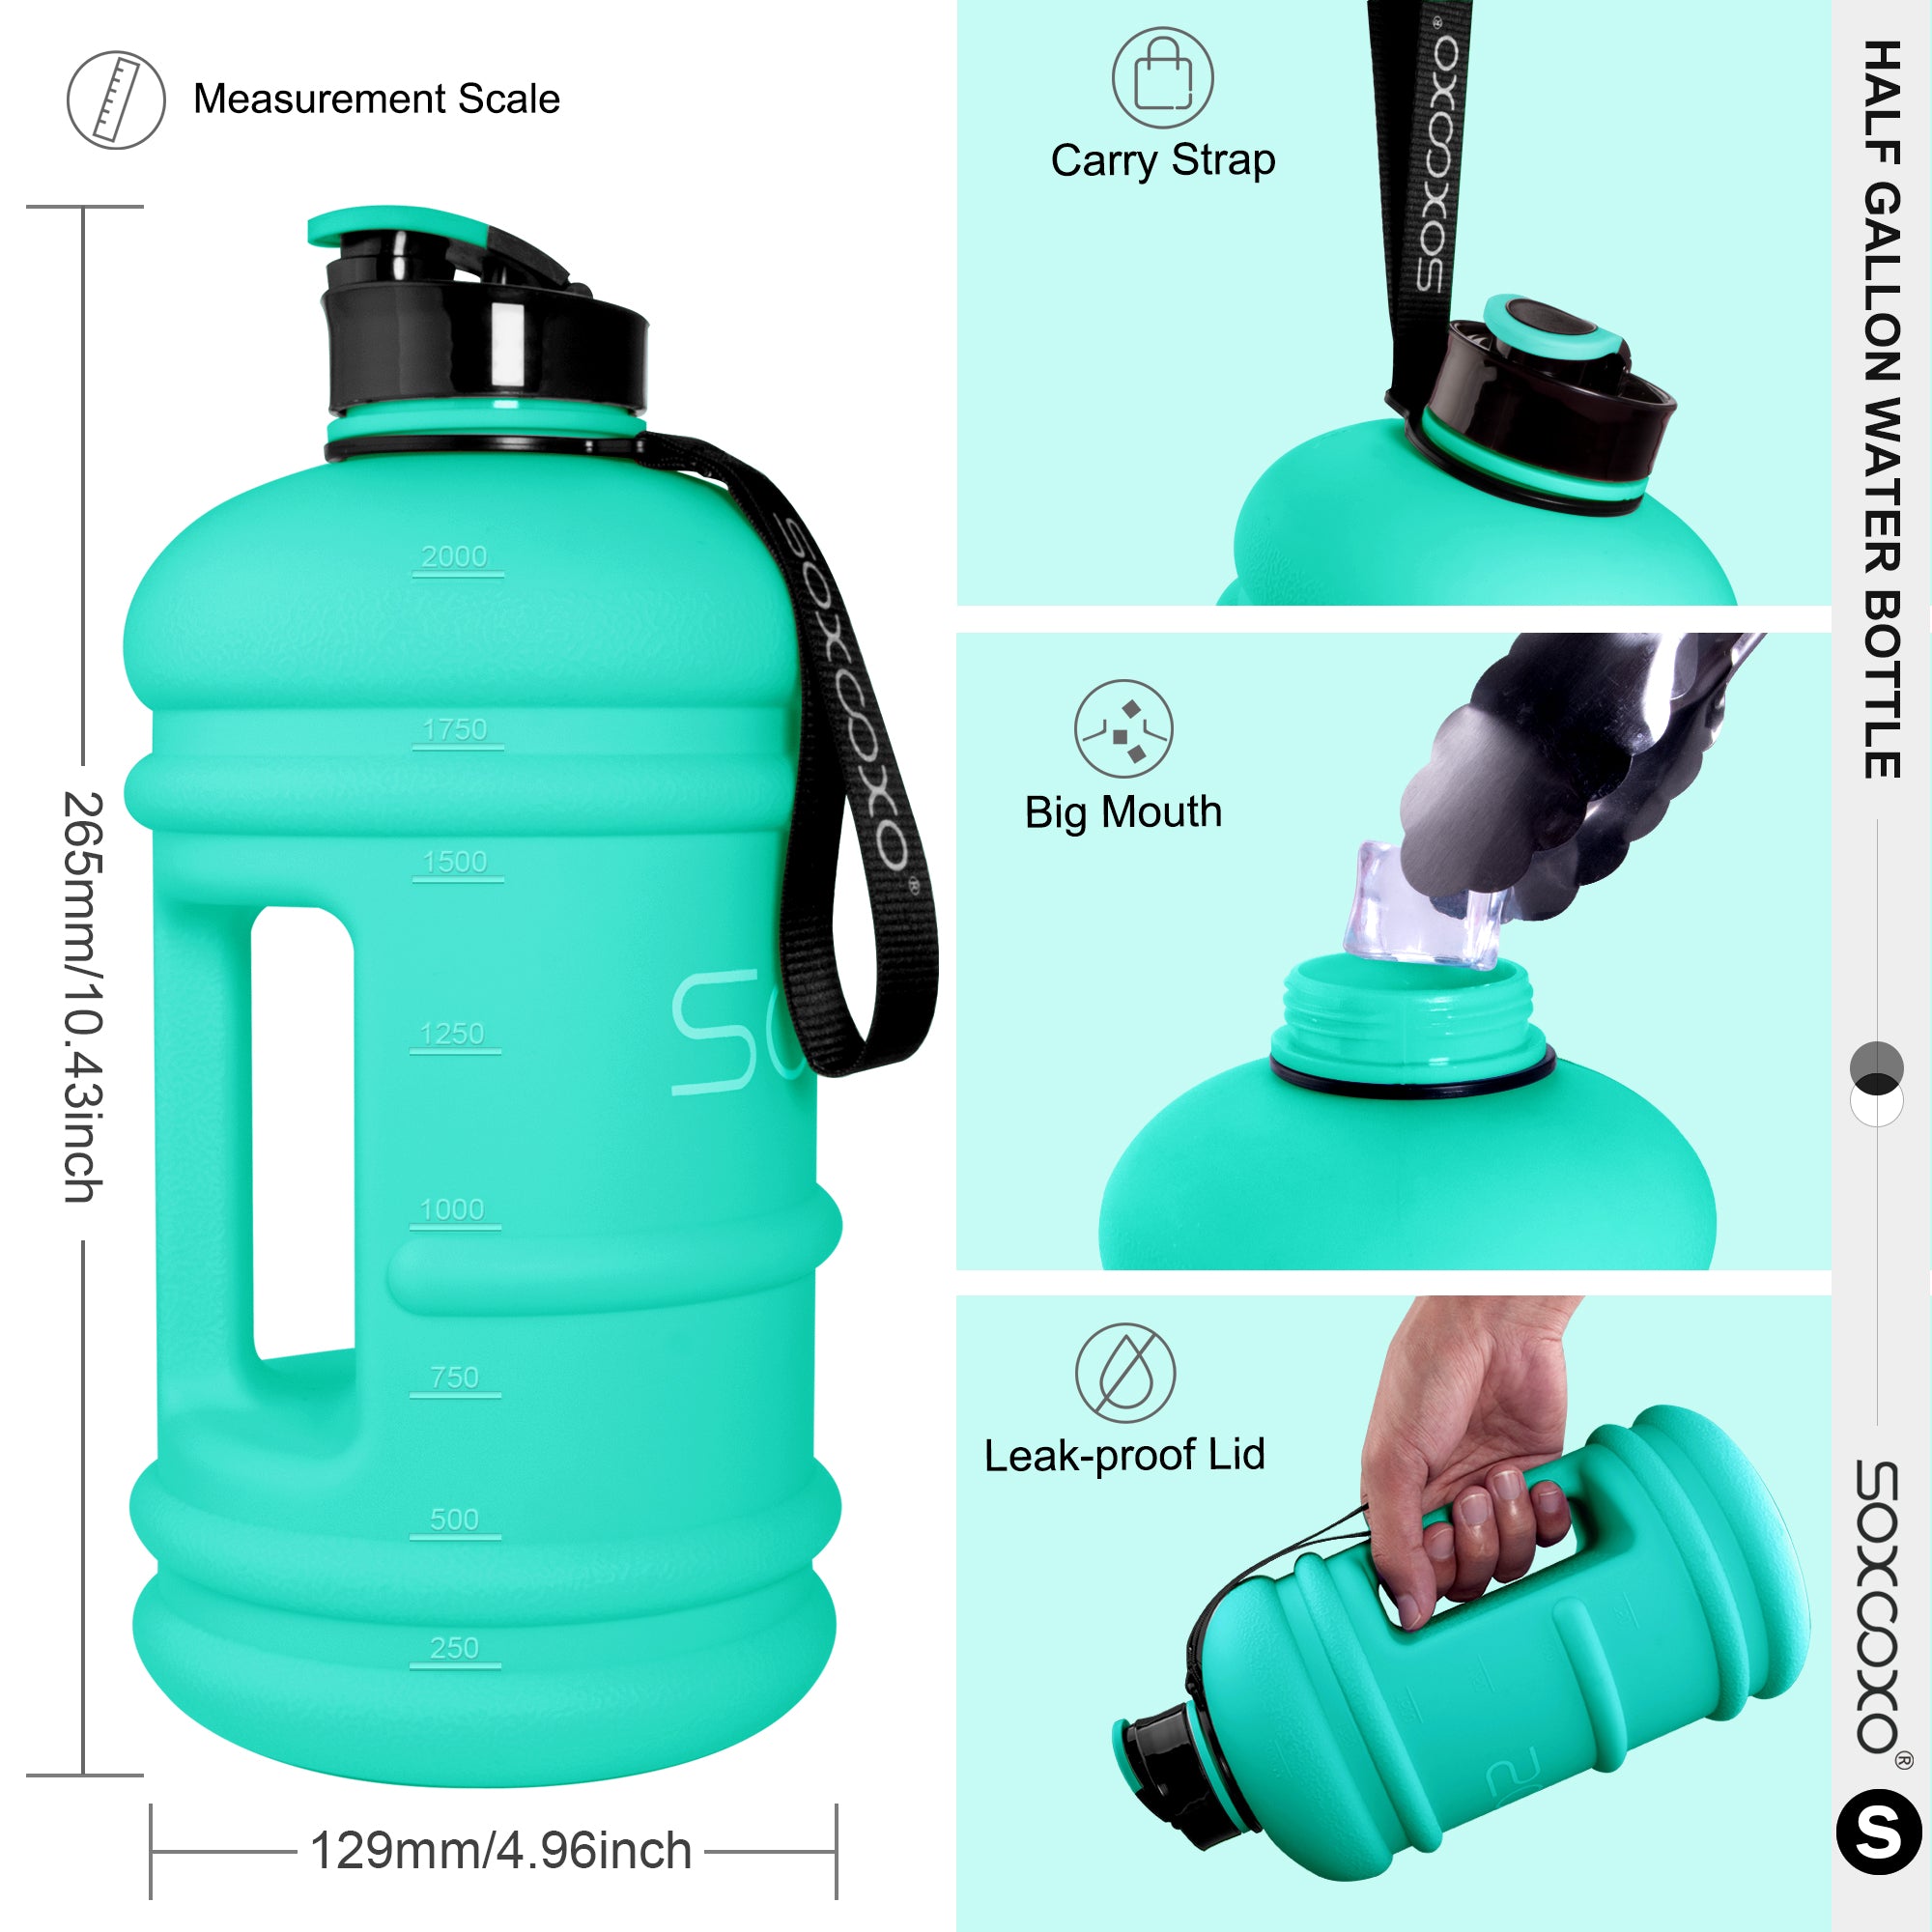 64 oz Half Gallon Water Bottle Sleeve with A Back Strap for Non-Hot Non-Slip Cup Sleeves-Gym Workout,Hiking,camping(Bottle Not Included), Size: 17